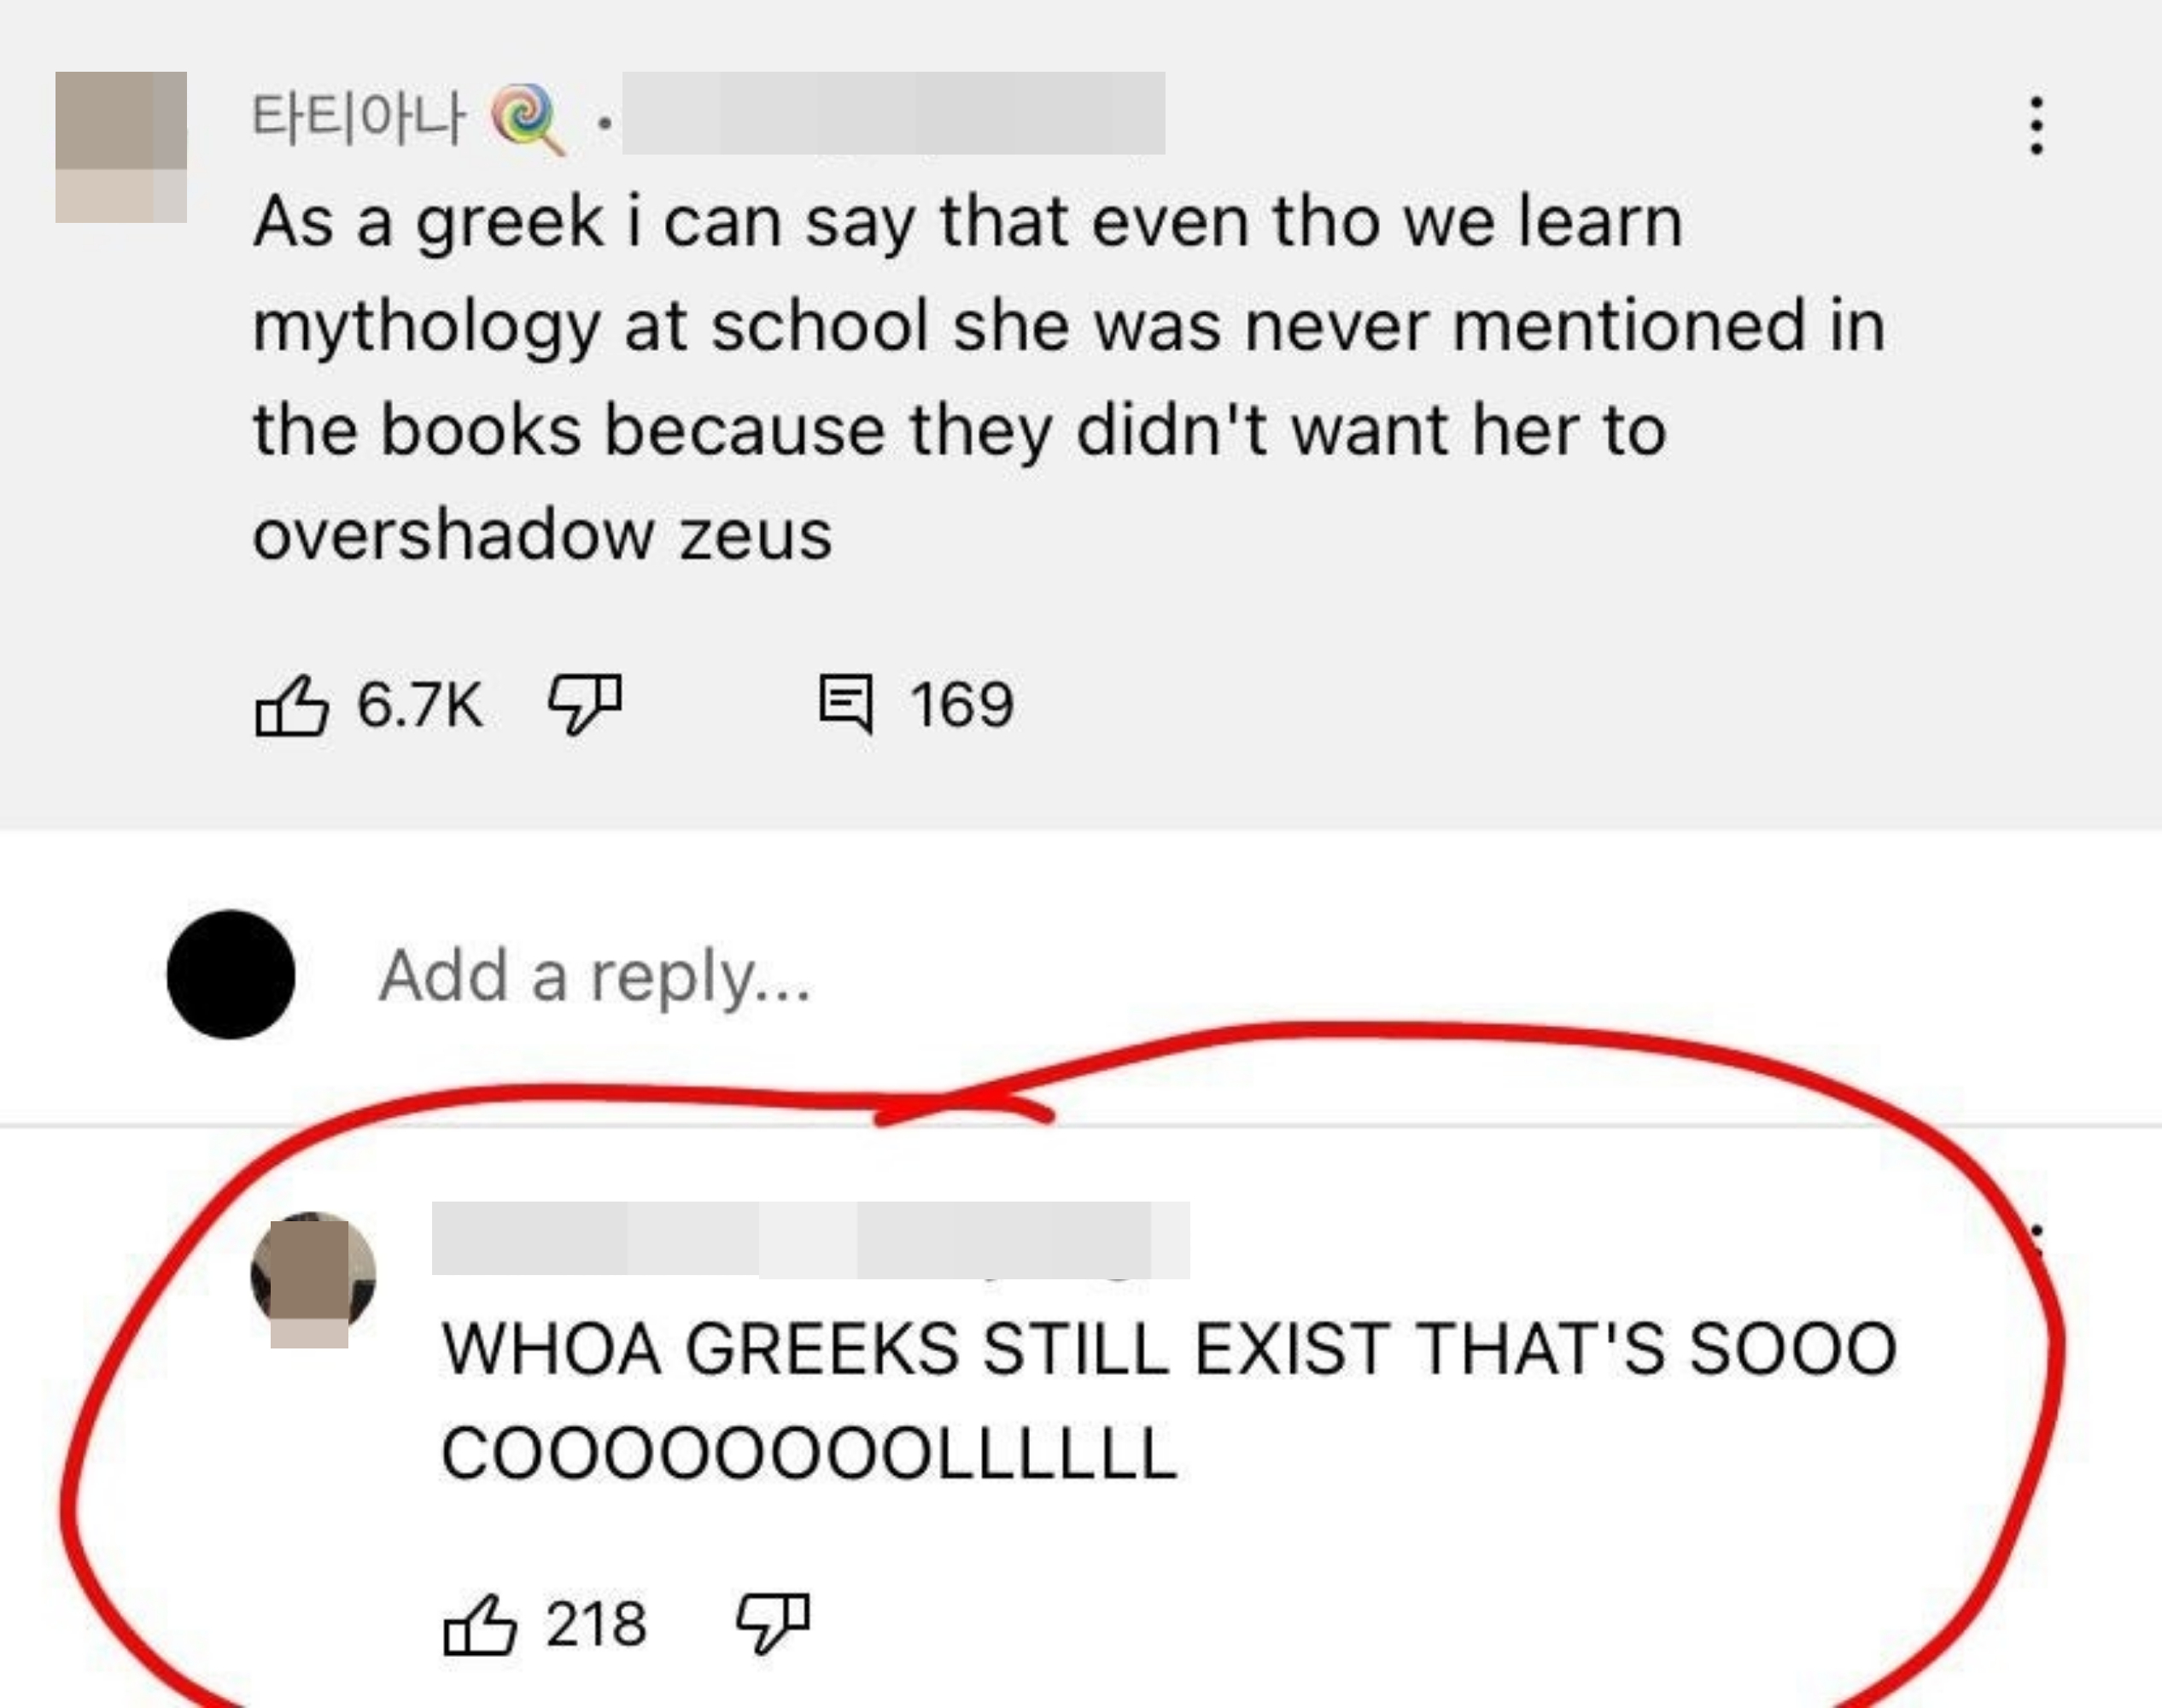 &quot;As a greek i can say that even tho we learn mythology at school she was never mentioned in the books because they didn&#x27;t want her to overshadow zeus,&quot; &quot;WHOA GREEKS STILL EXIST THAT&#x27;S SOOO COOOOOOOOLLLLLL&quot;